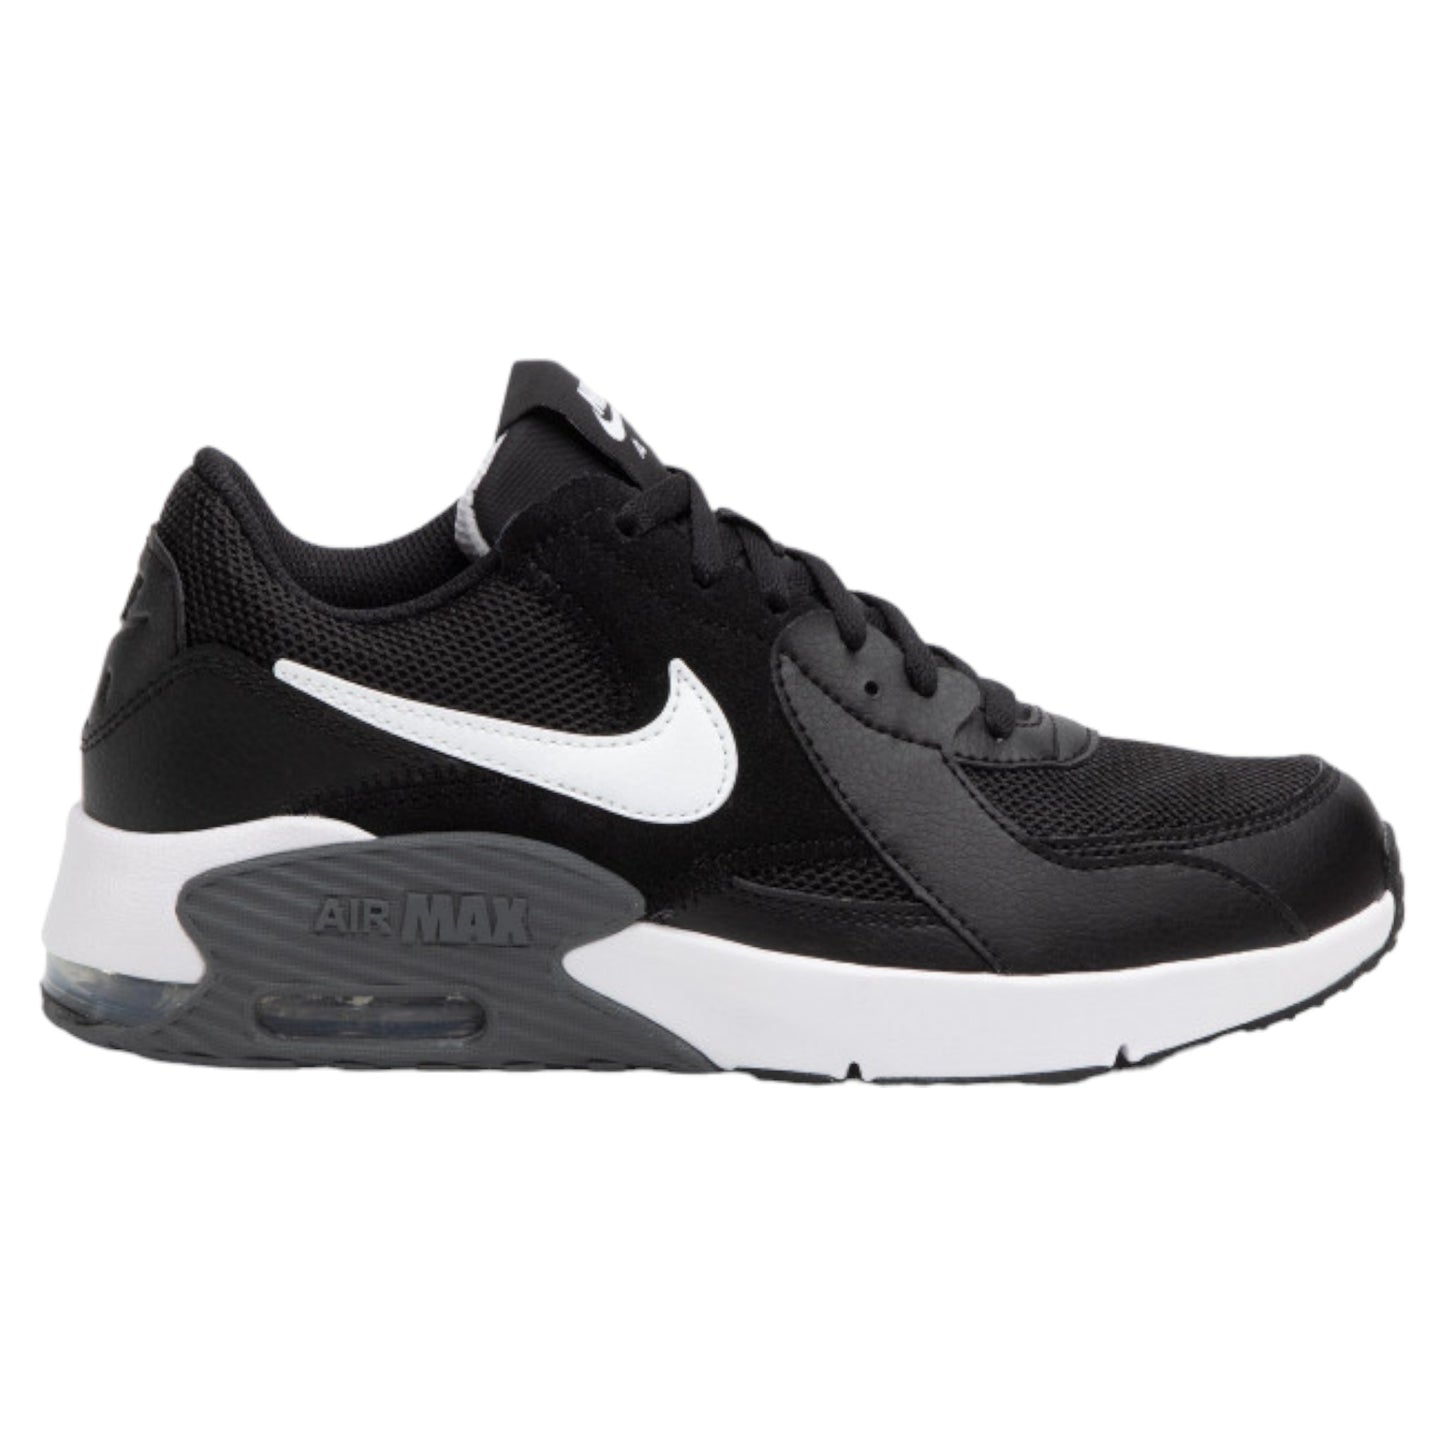 + Nike Youth Air Max Excee Blk/Wht - (CD6894 001) - N70 - R1L2